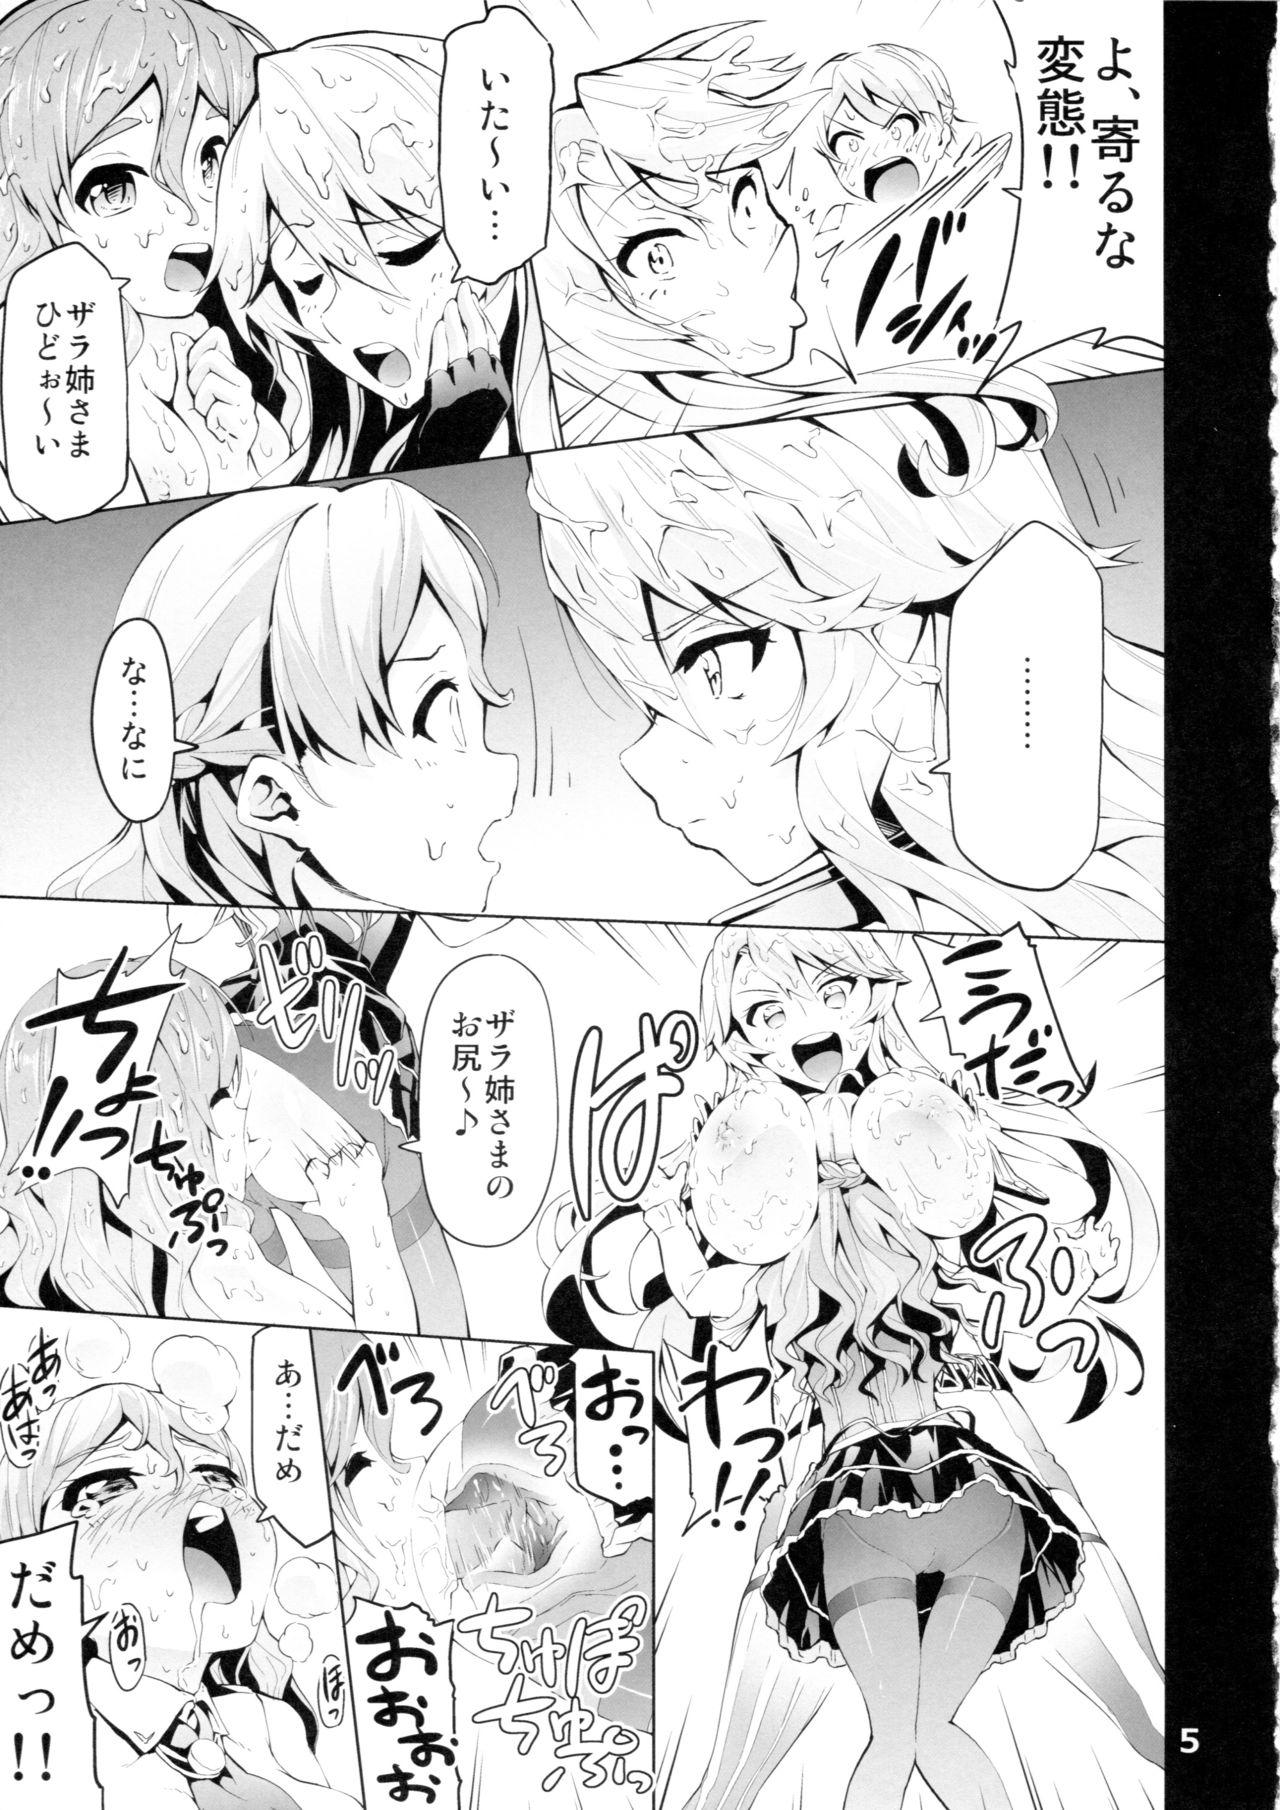 Cash ICE WORK 3 - Kantai collection Olderwoman - Page 4